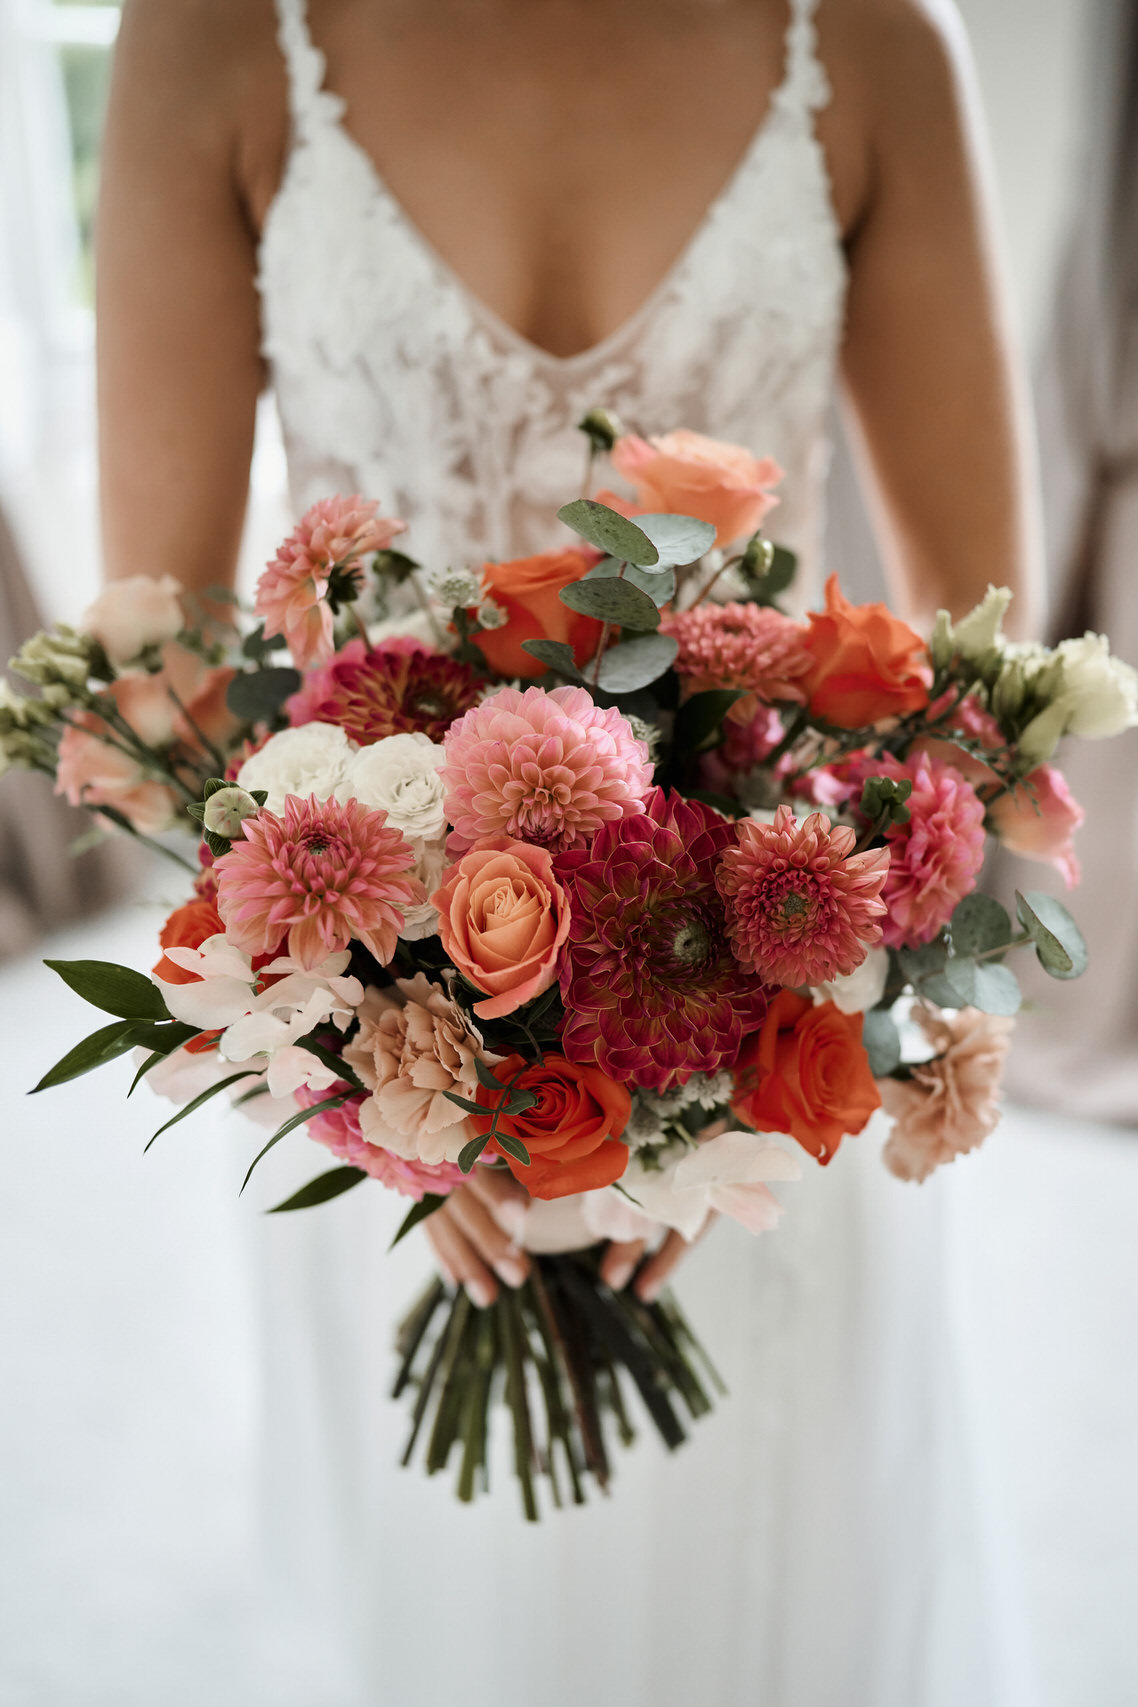 A bride holding a bouquet of pink and orange flowers.